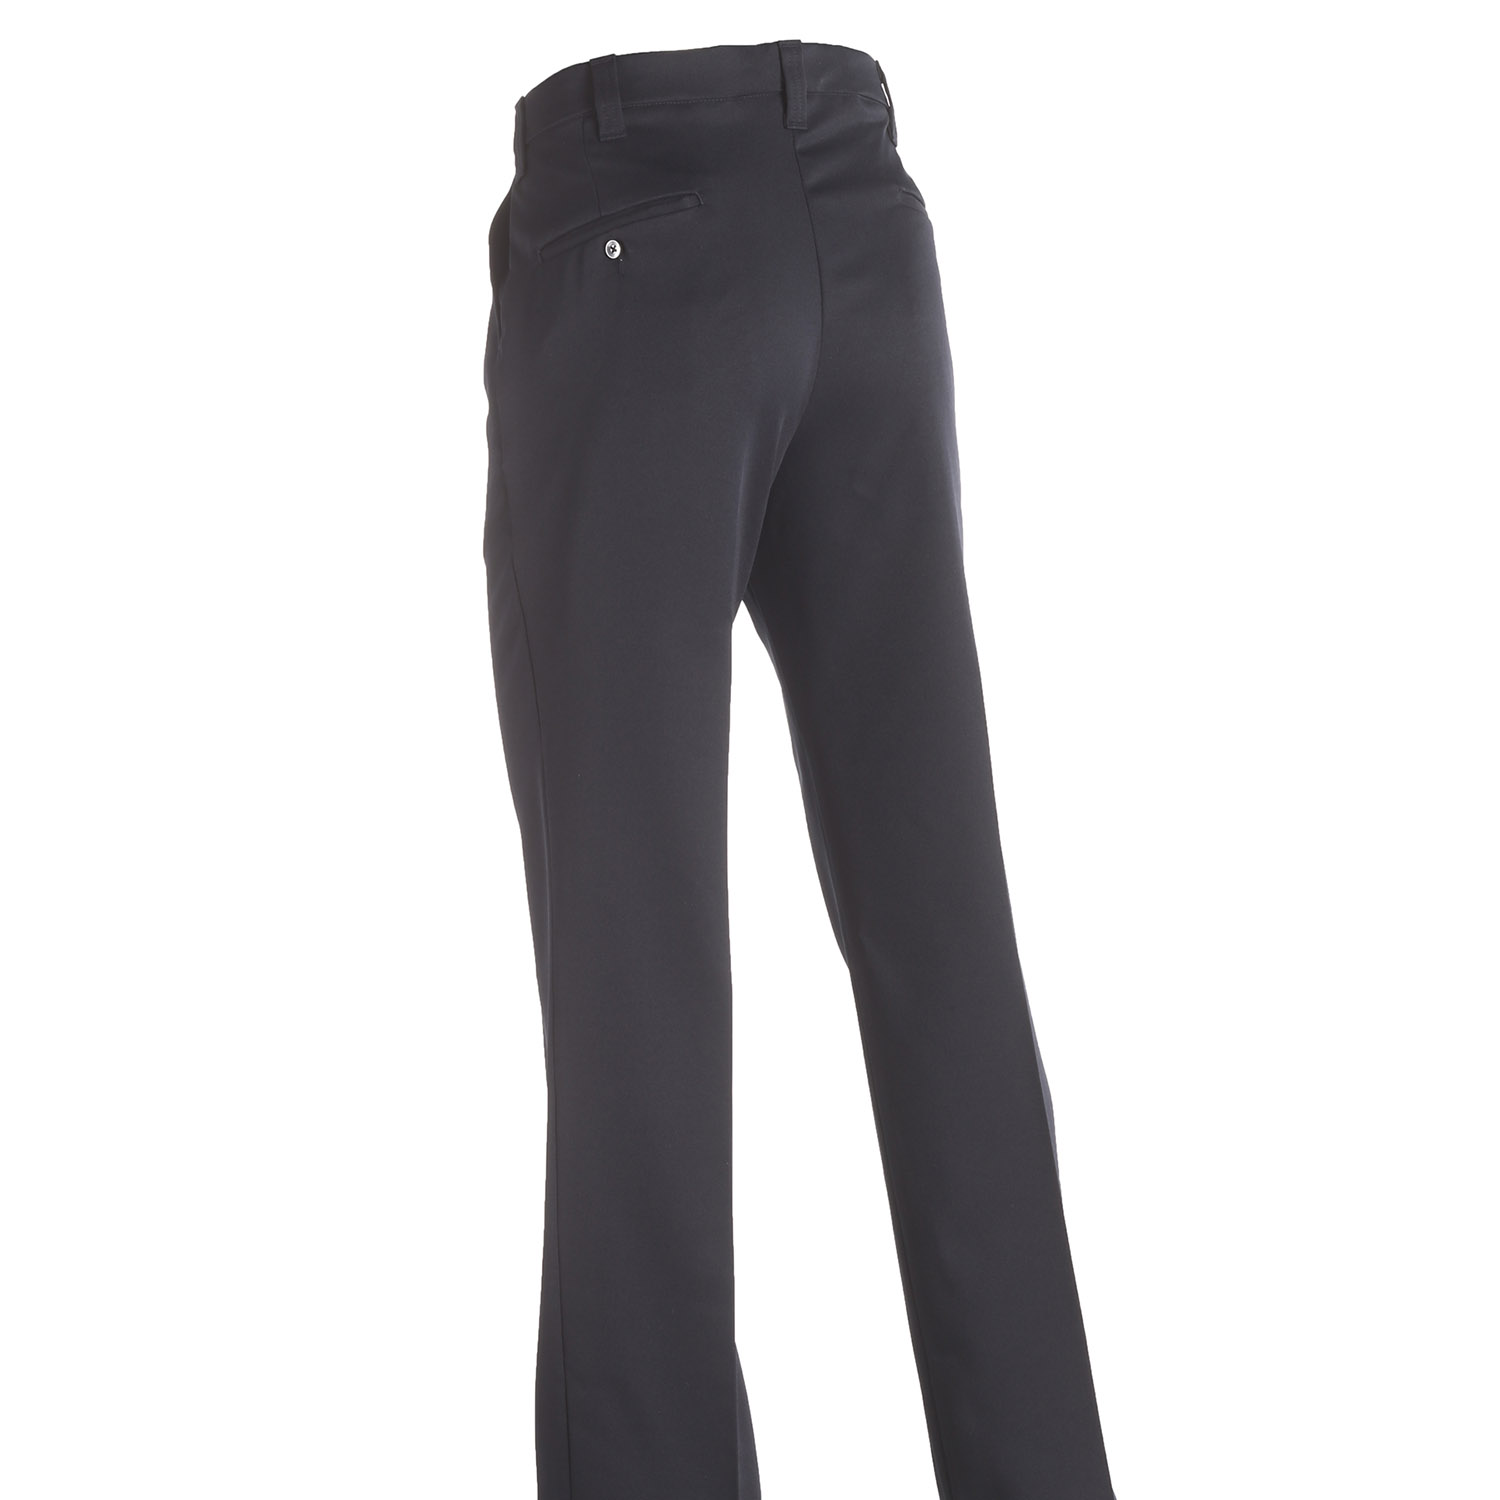 Horace Small Sentinel Security Pants